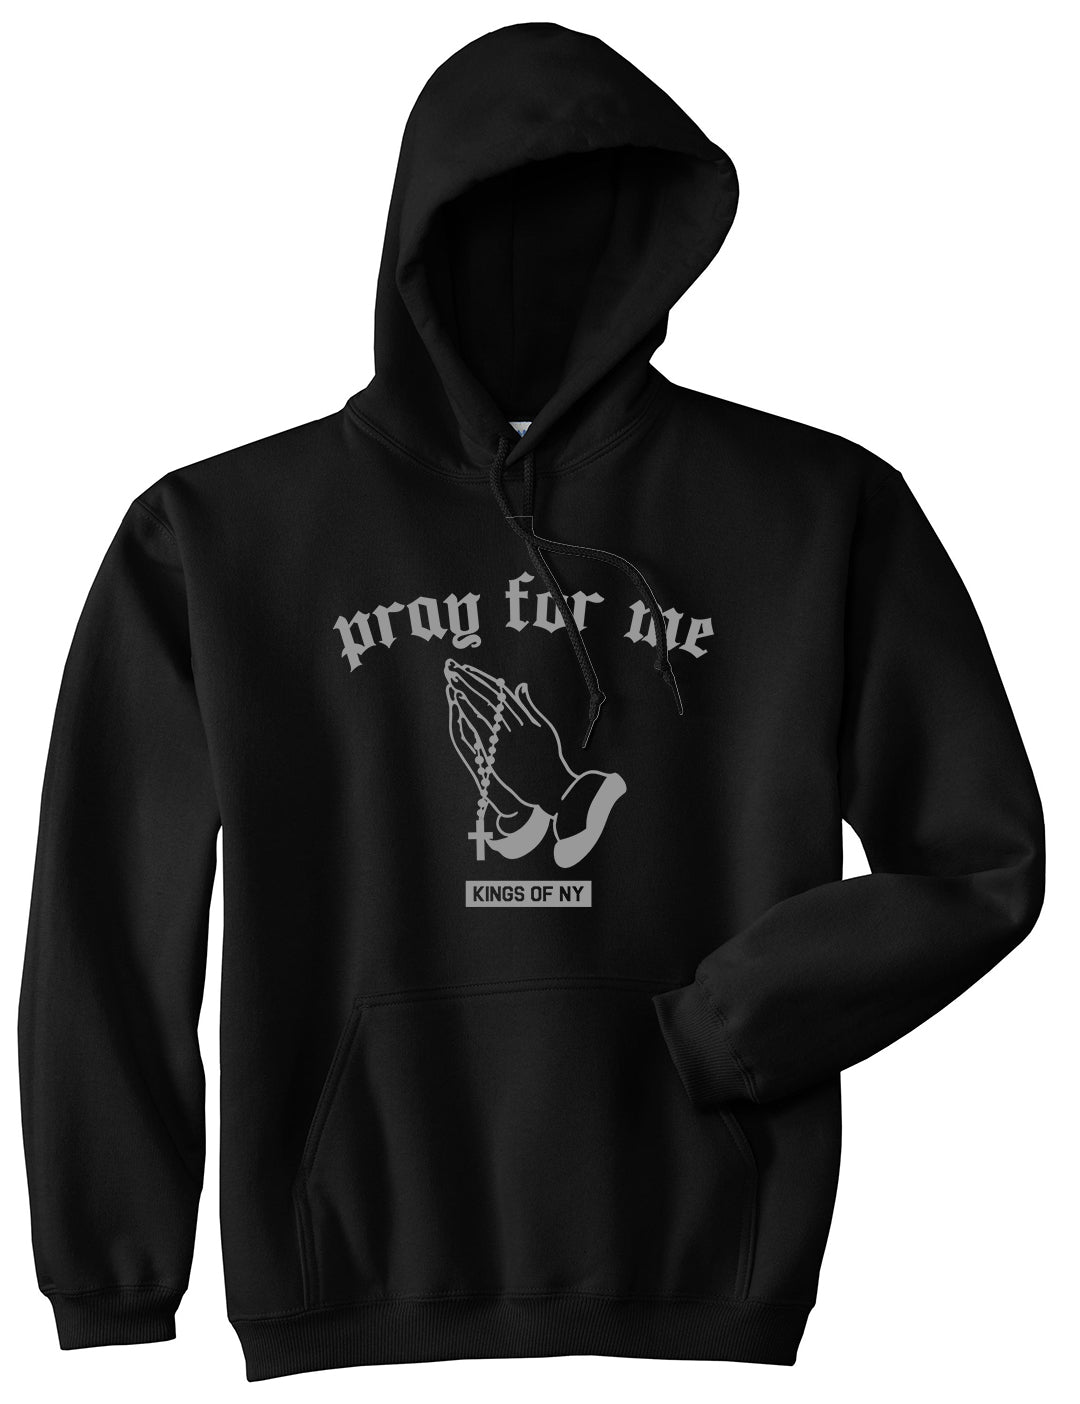 Pray For Me Mens Pullover Hoodie Black by Kings Of NY